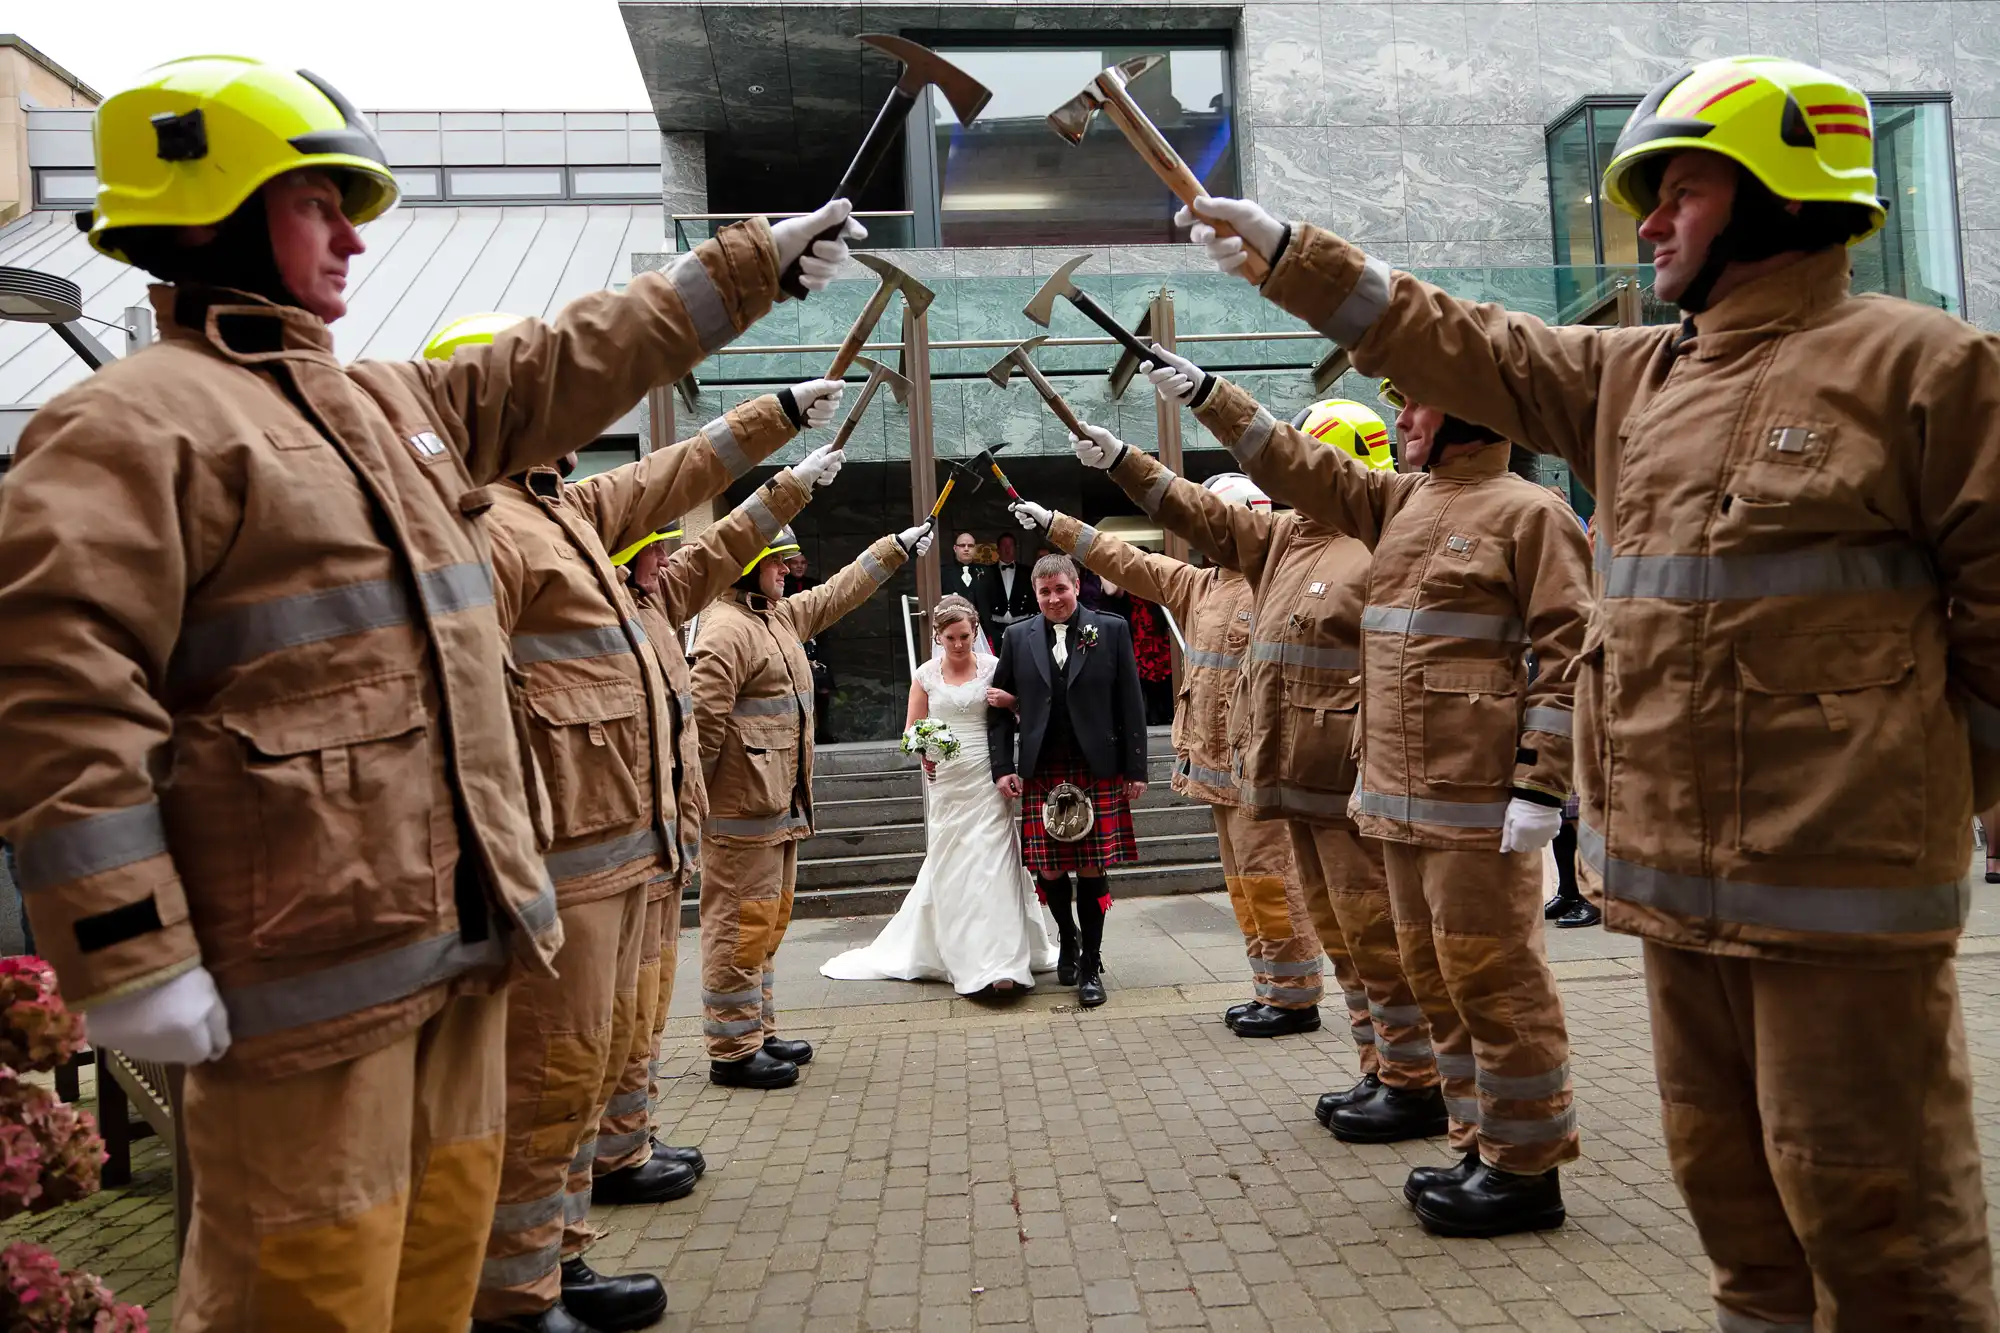 A bride and groom walk under an arch of axes held by firefighters in uniform, celebrating their wedding outside a building.